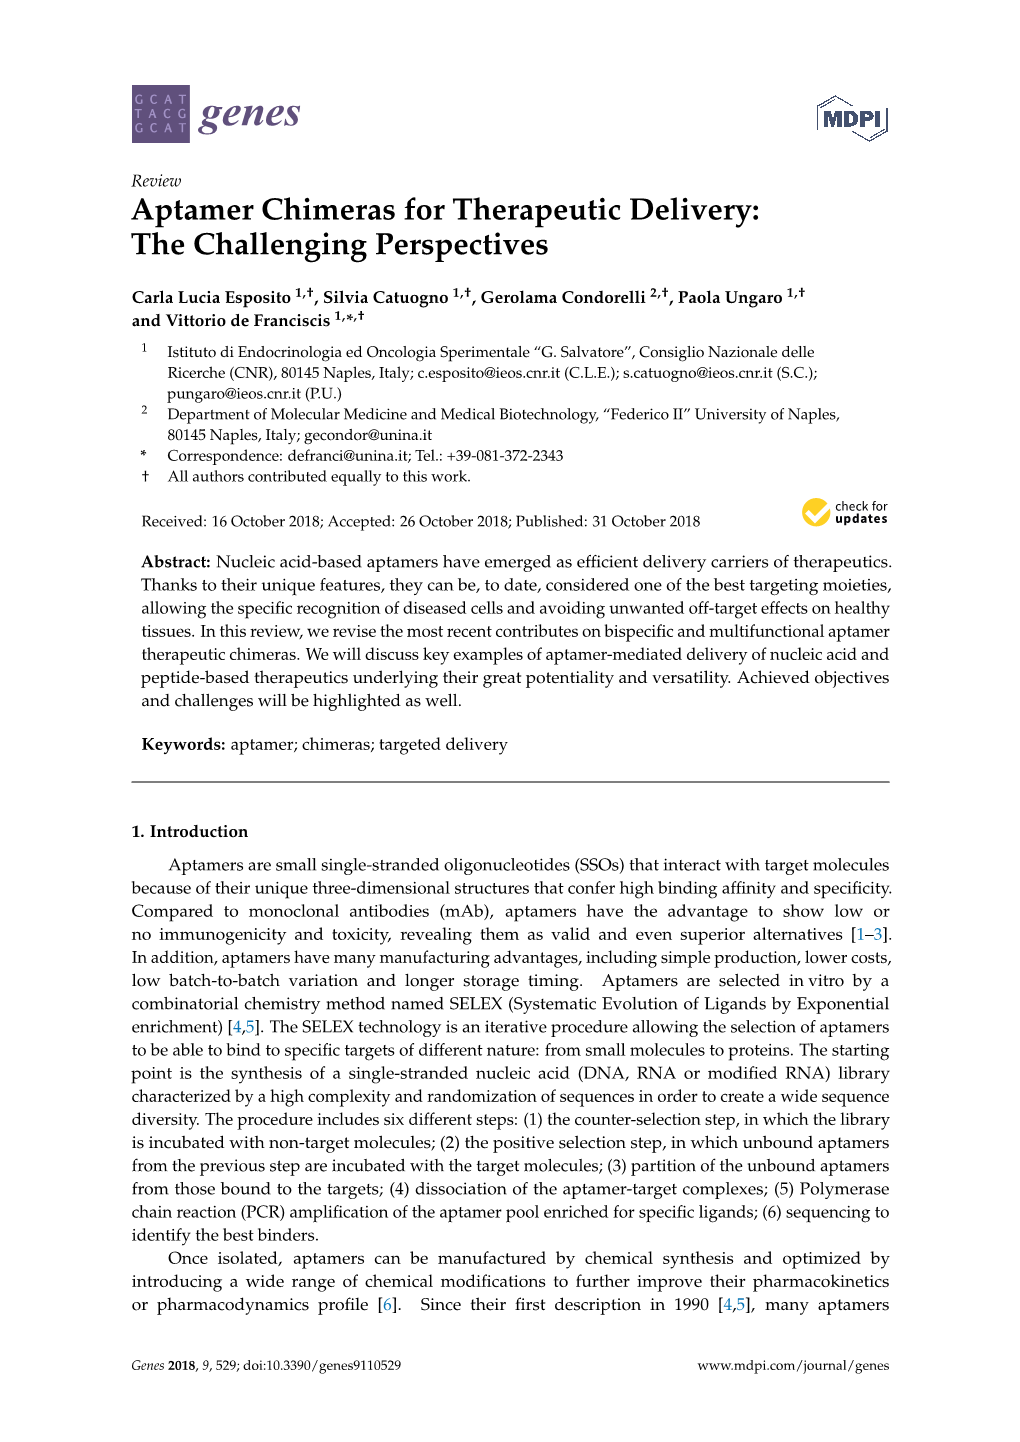 Aptamer Chimeras for Therapeutic Delivery: the Challenging Perspectives